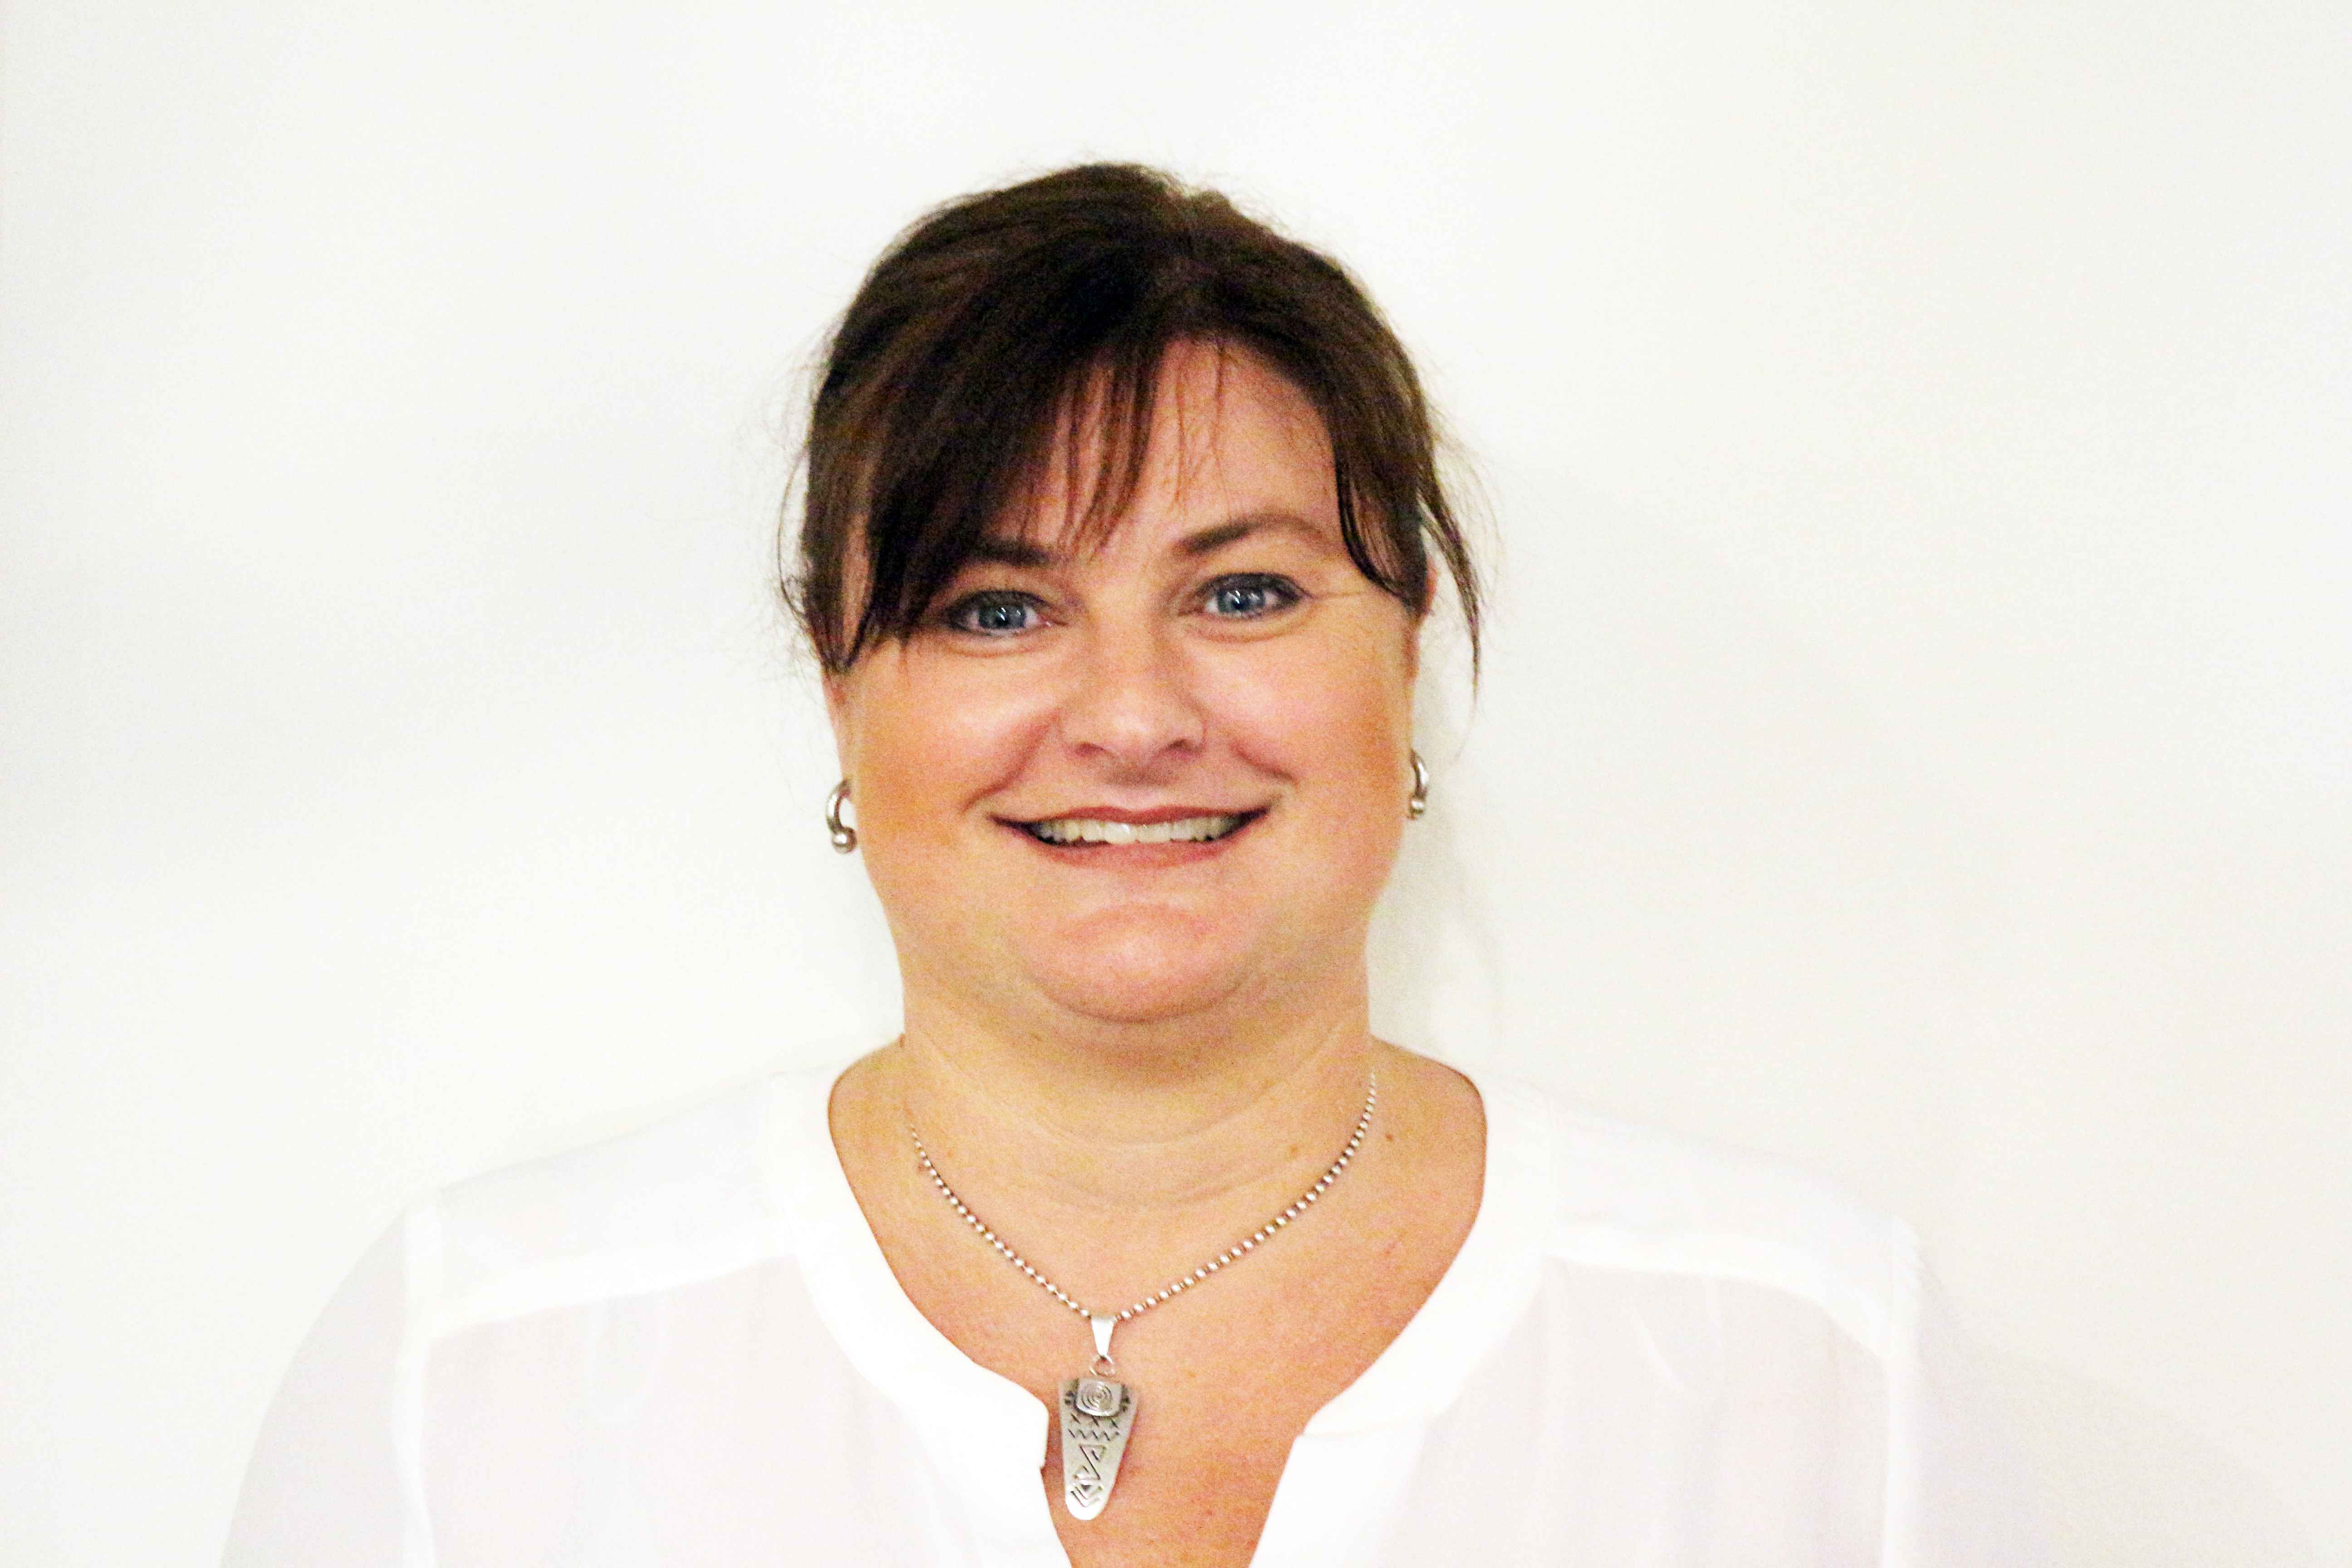 Michele Houston is Ridgeview Aged Care's Care Manager.